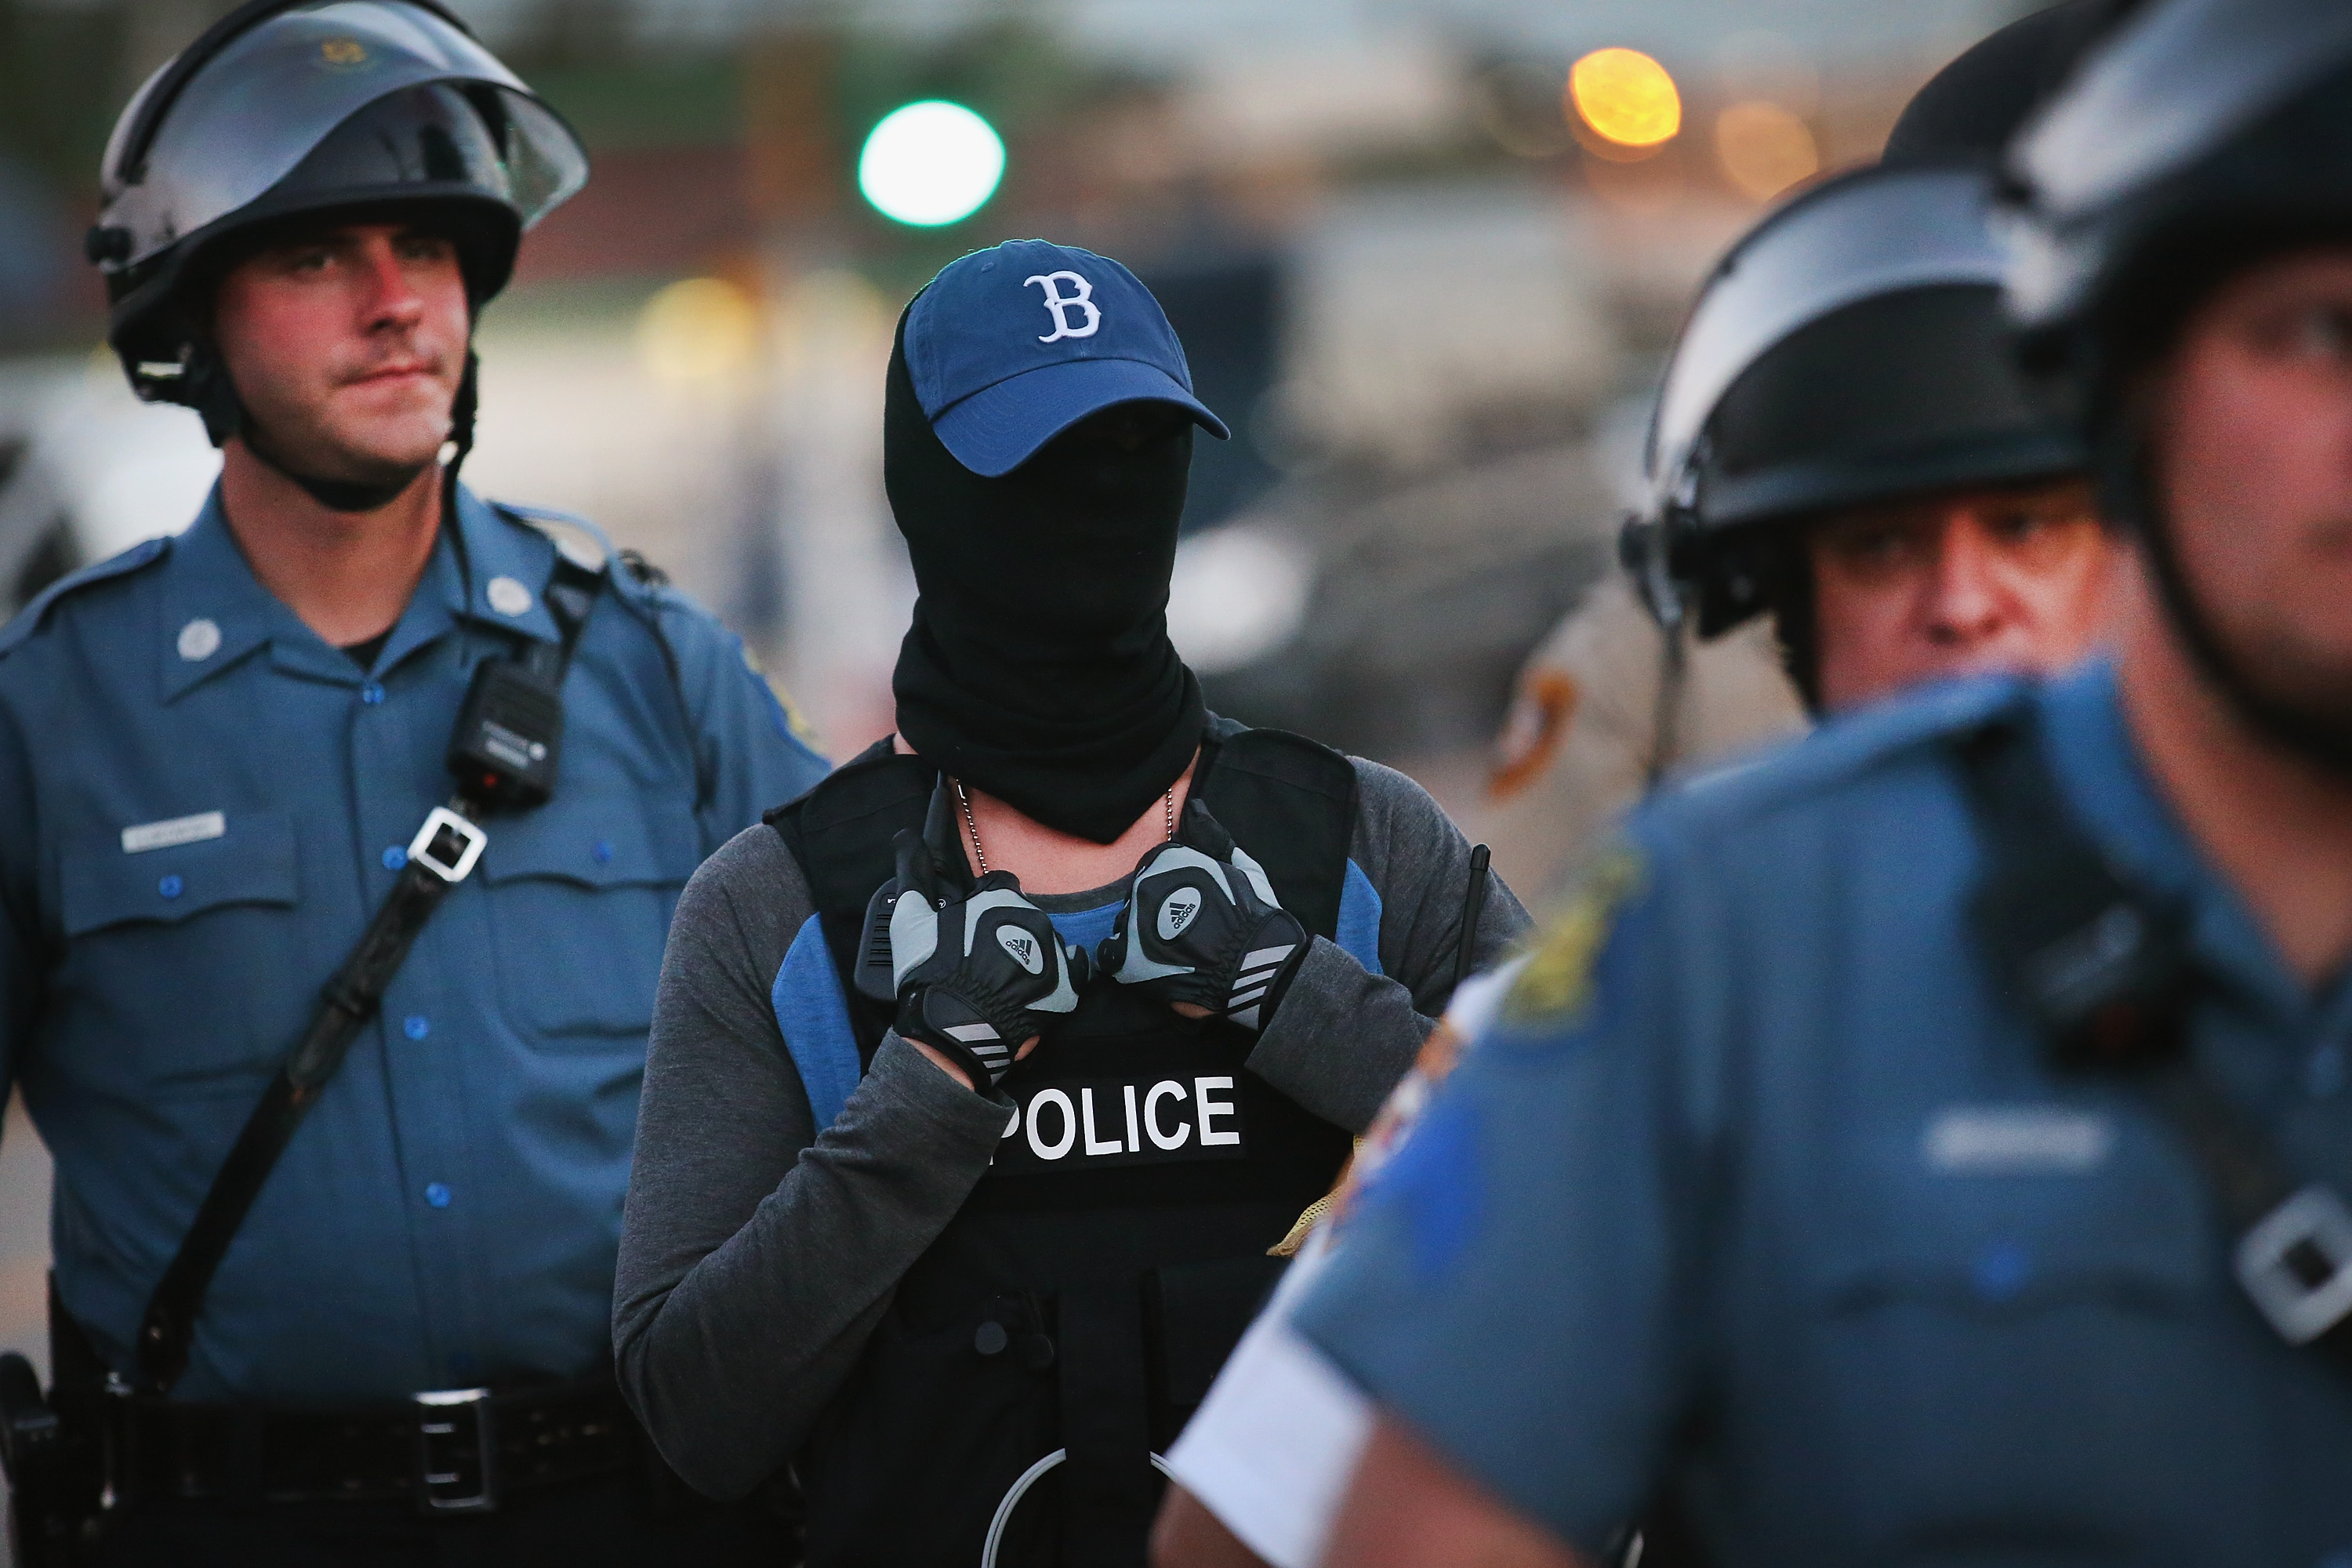 A police officer standing watch as demonstrators protest the shooting death of teenager Michael Brown conceals his/her identity on August 13, 2014 in Ferguson, Missouri. (Scott Olson&mdash;Getty Images)